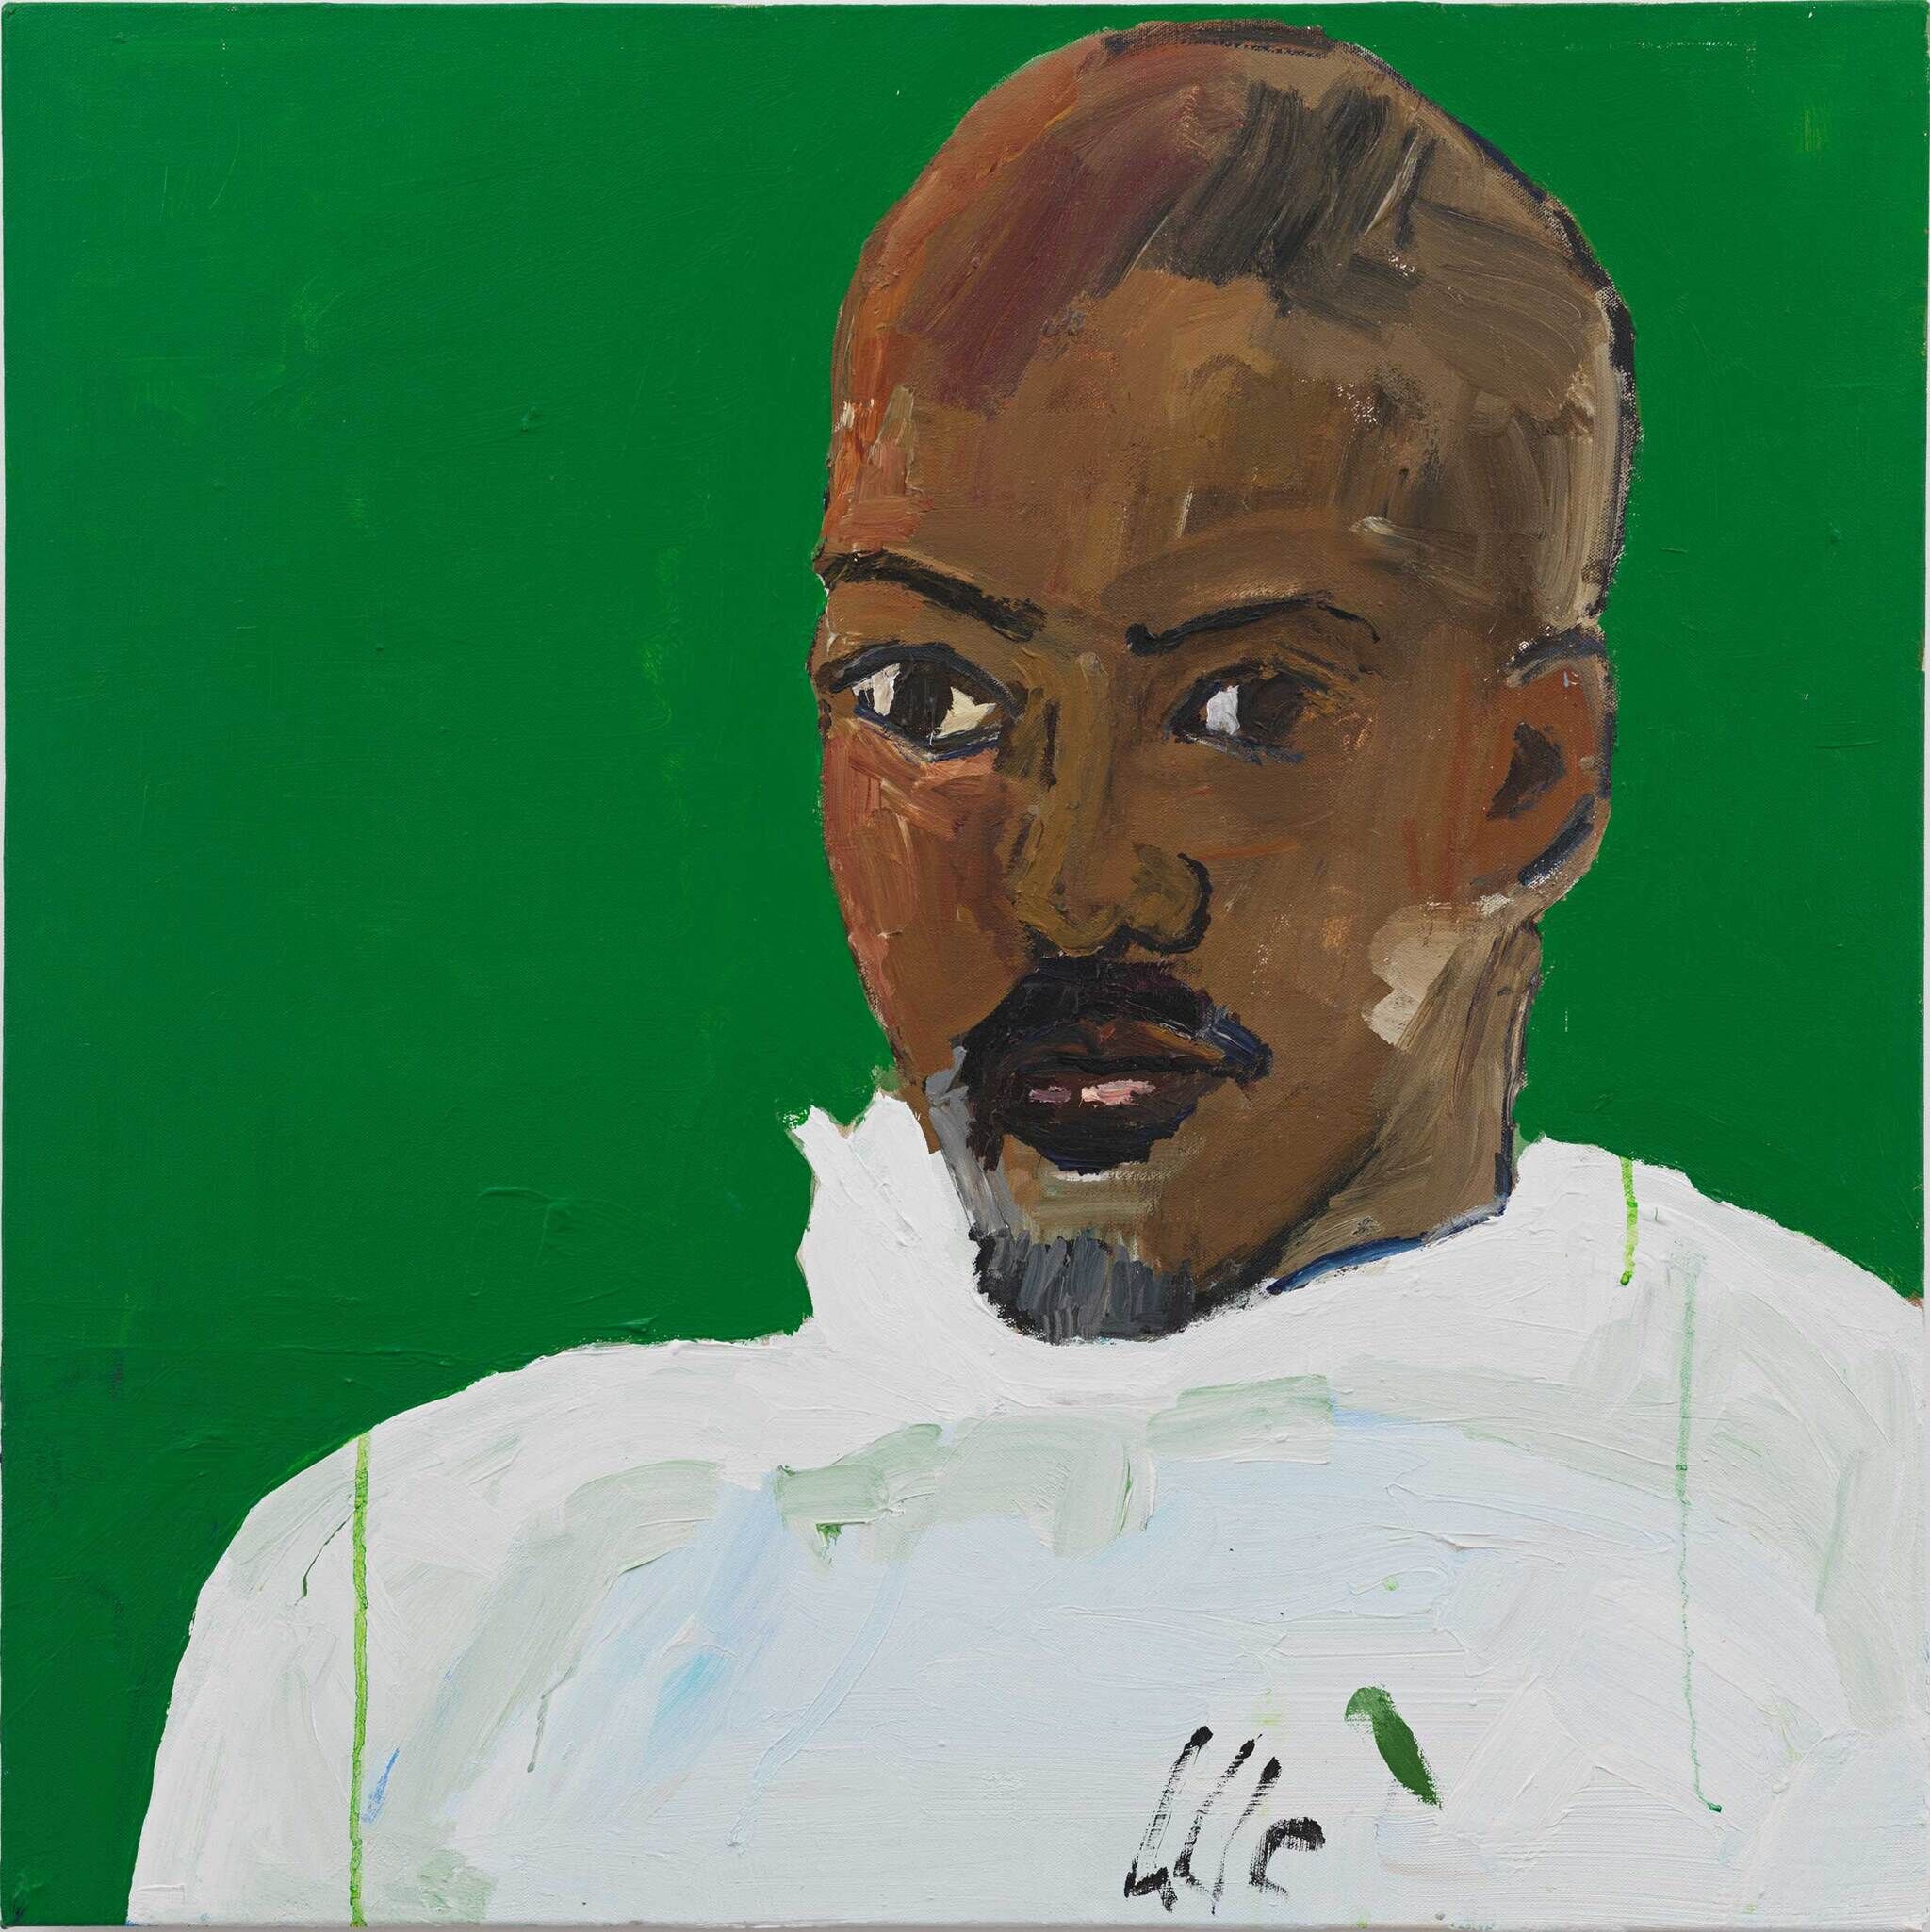 A closeup portrait of a bald Black man with a moustache and soul patch. He wears a white shirt with a high neckline. The background is a vivid green color.